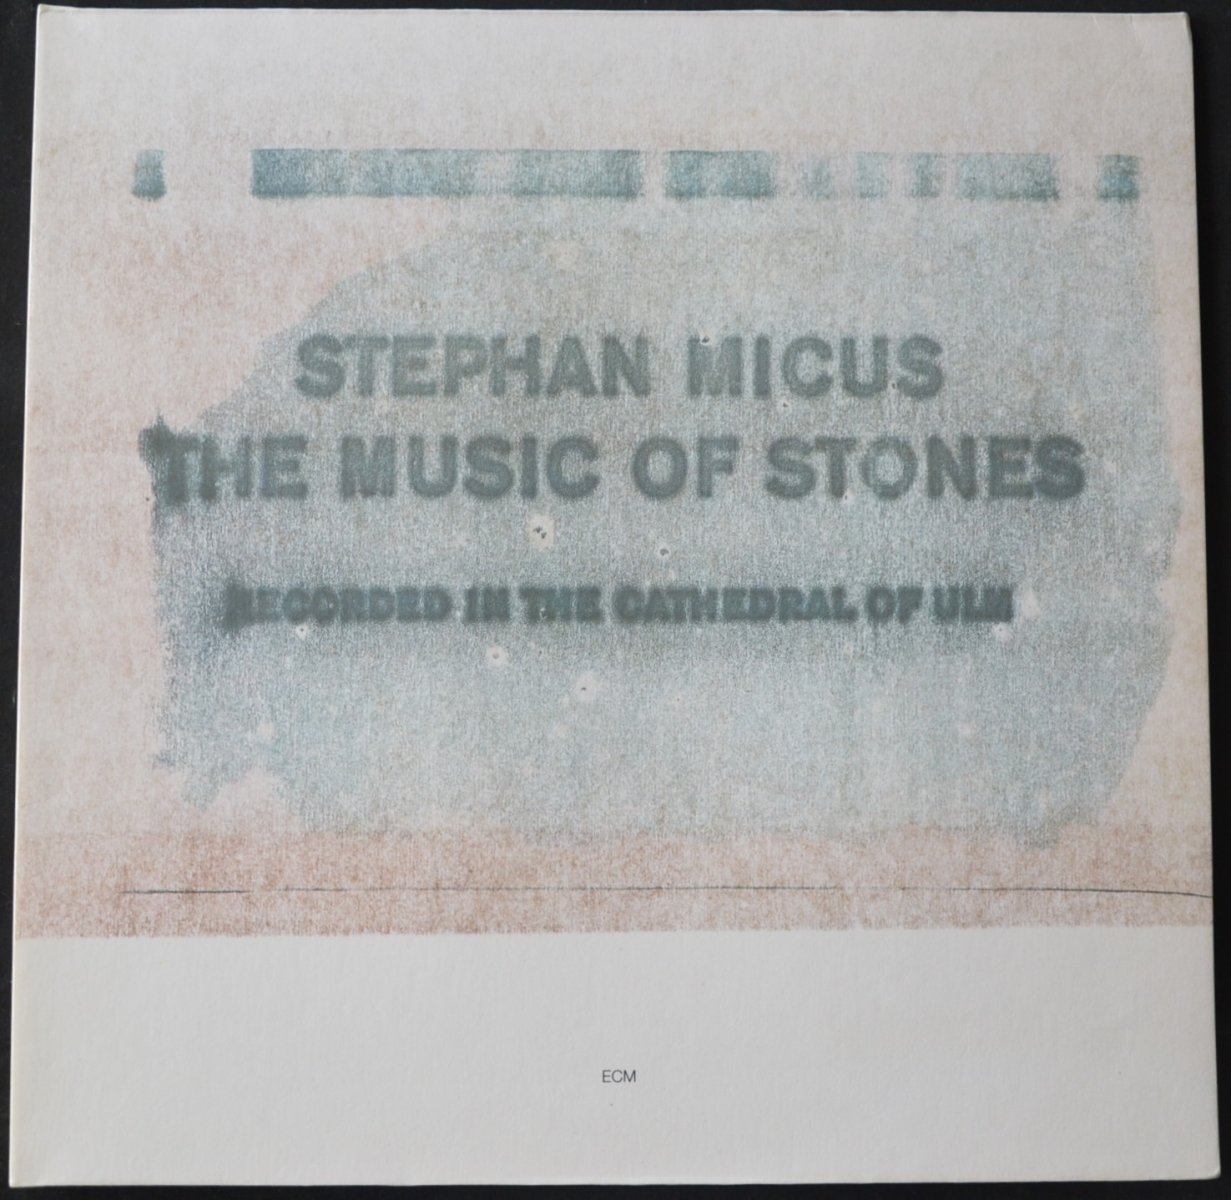 STEPHAN MICUS / THE MUSIC OF STONES (LP)